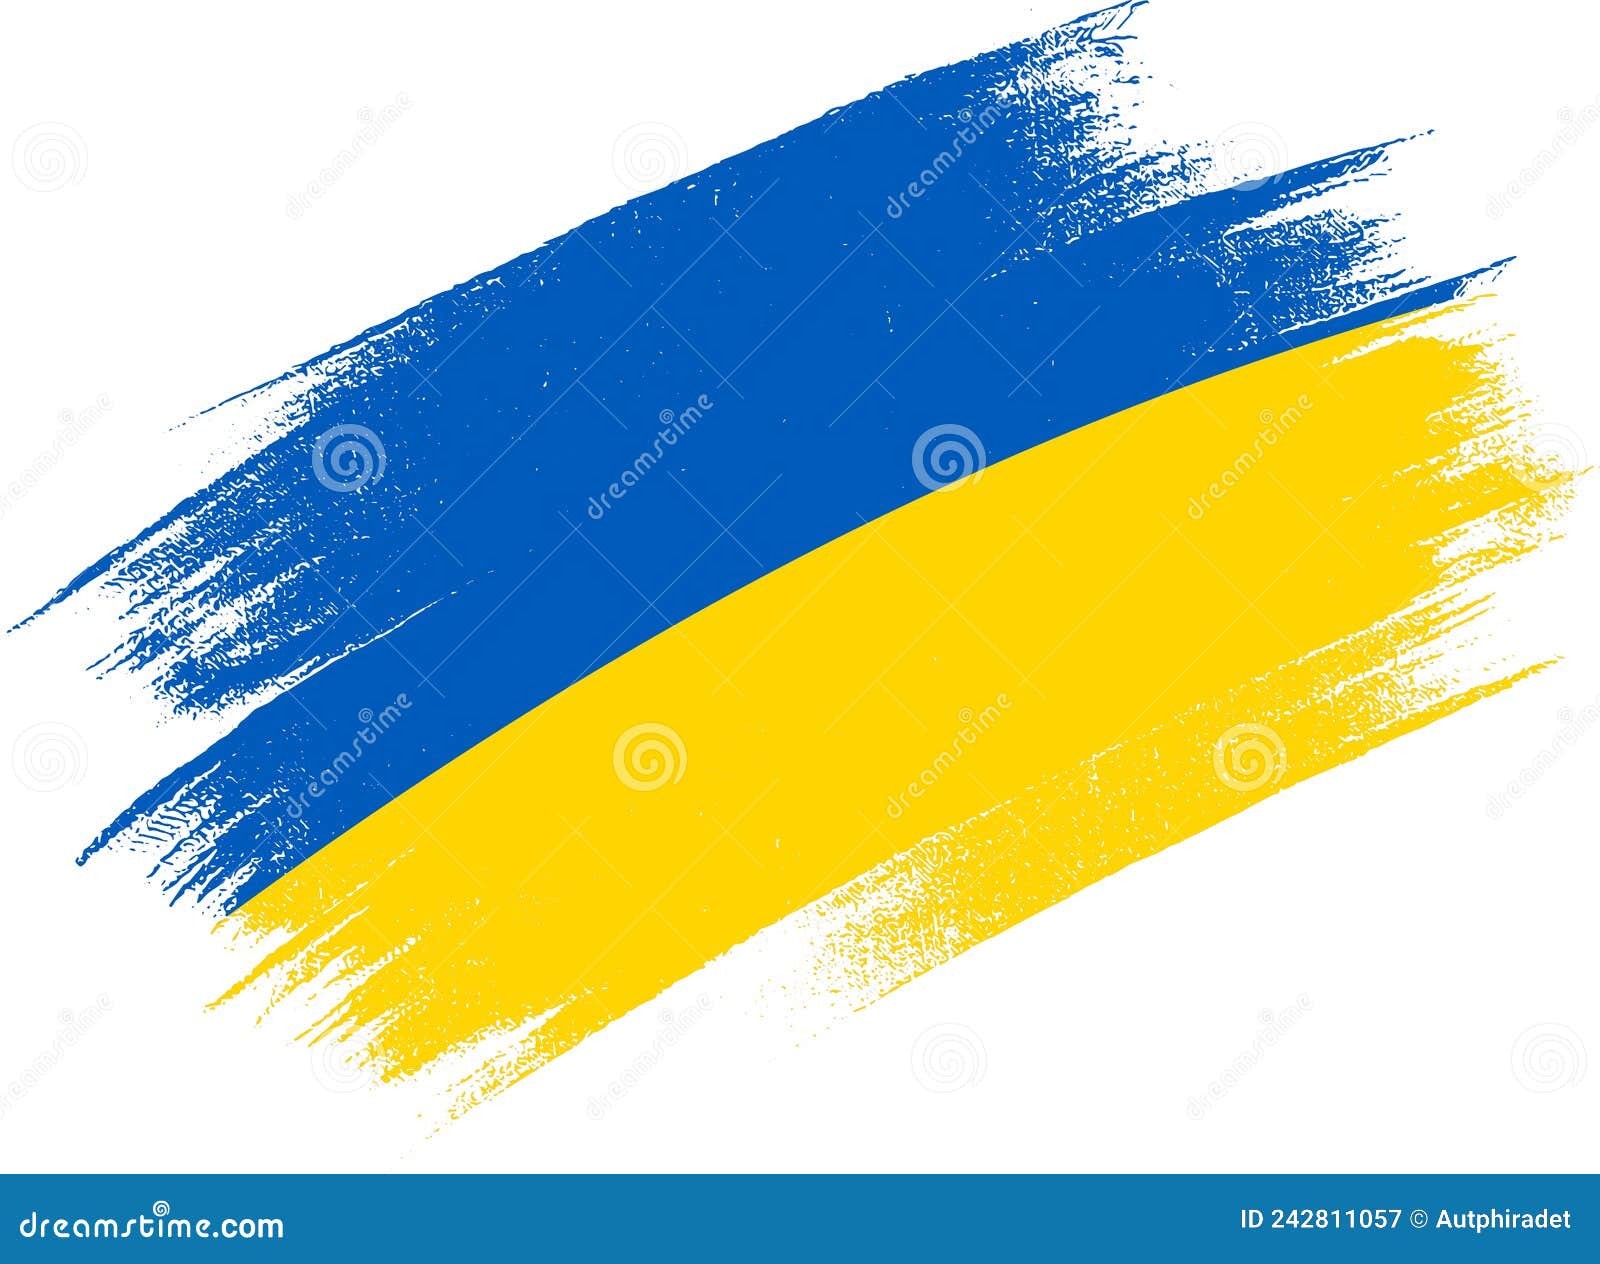 Ukraine Flag Brush Paint Textured Isolated on Png or Transparent Background,Symbol  of Ukraine ,template for Banner,promote, Stock Vector - Illustration of  graphic, grunge: 242811057